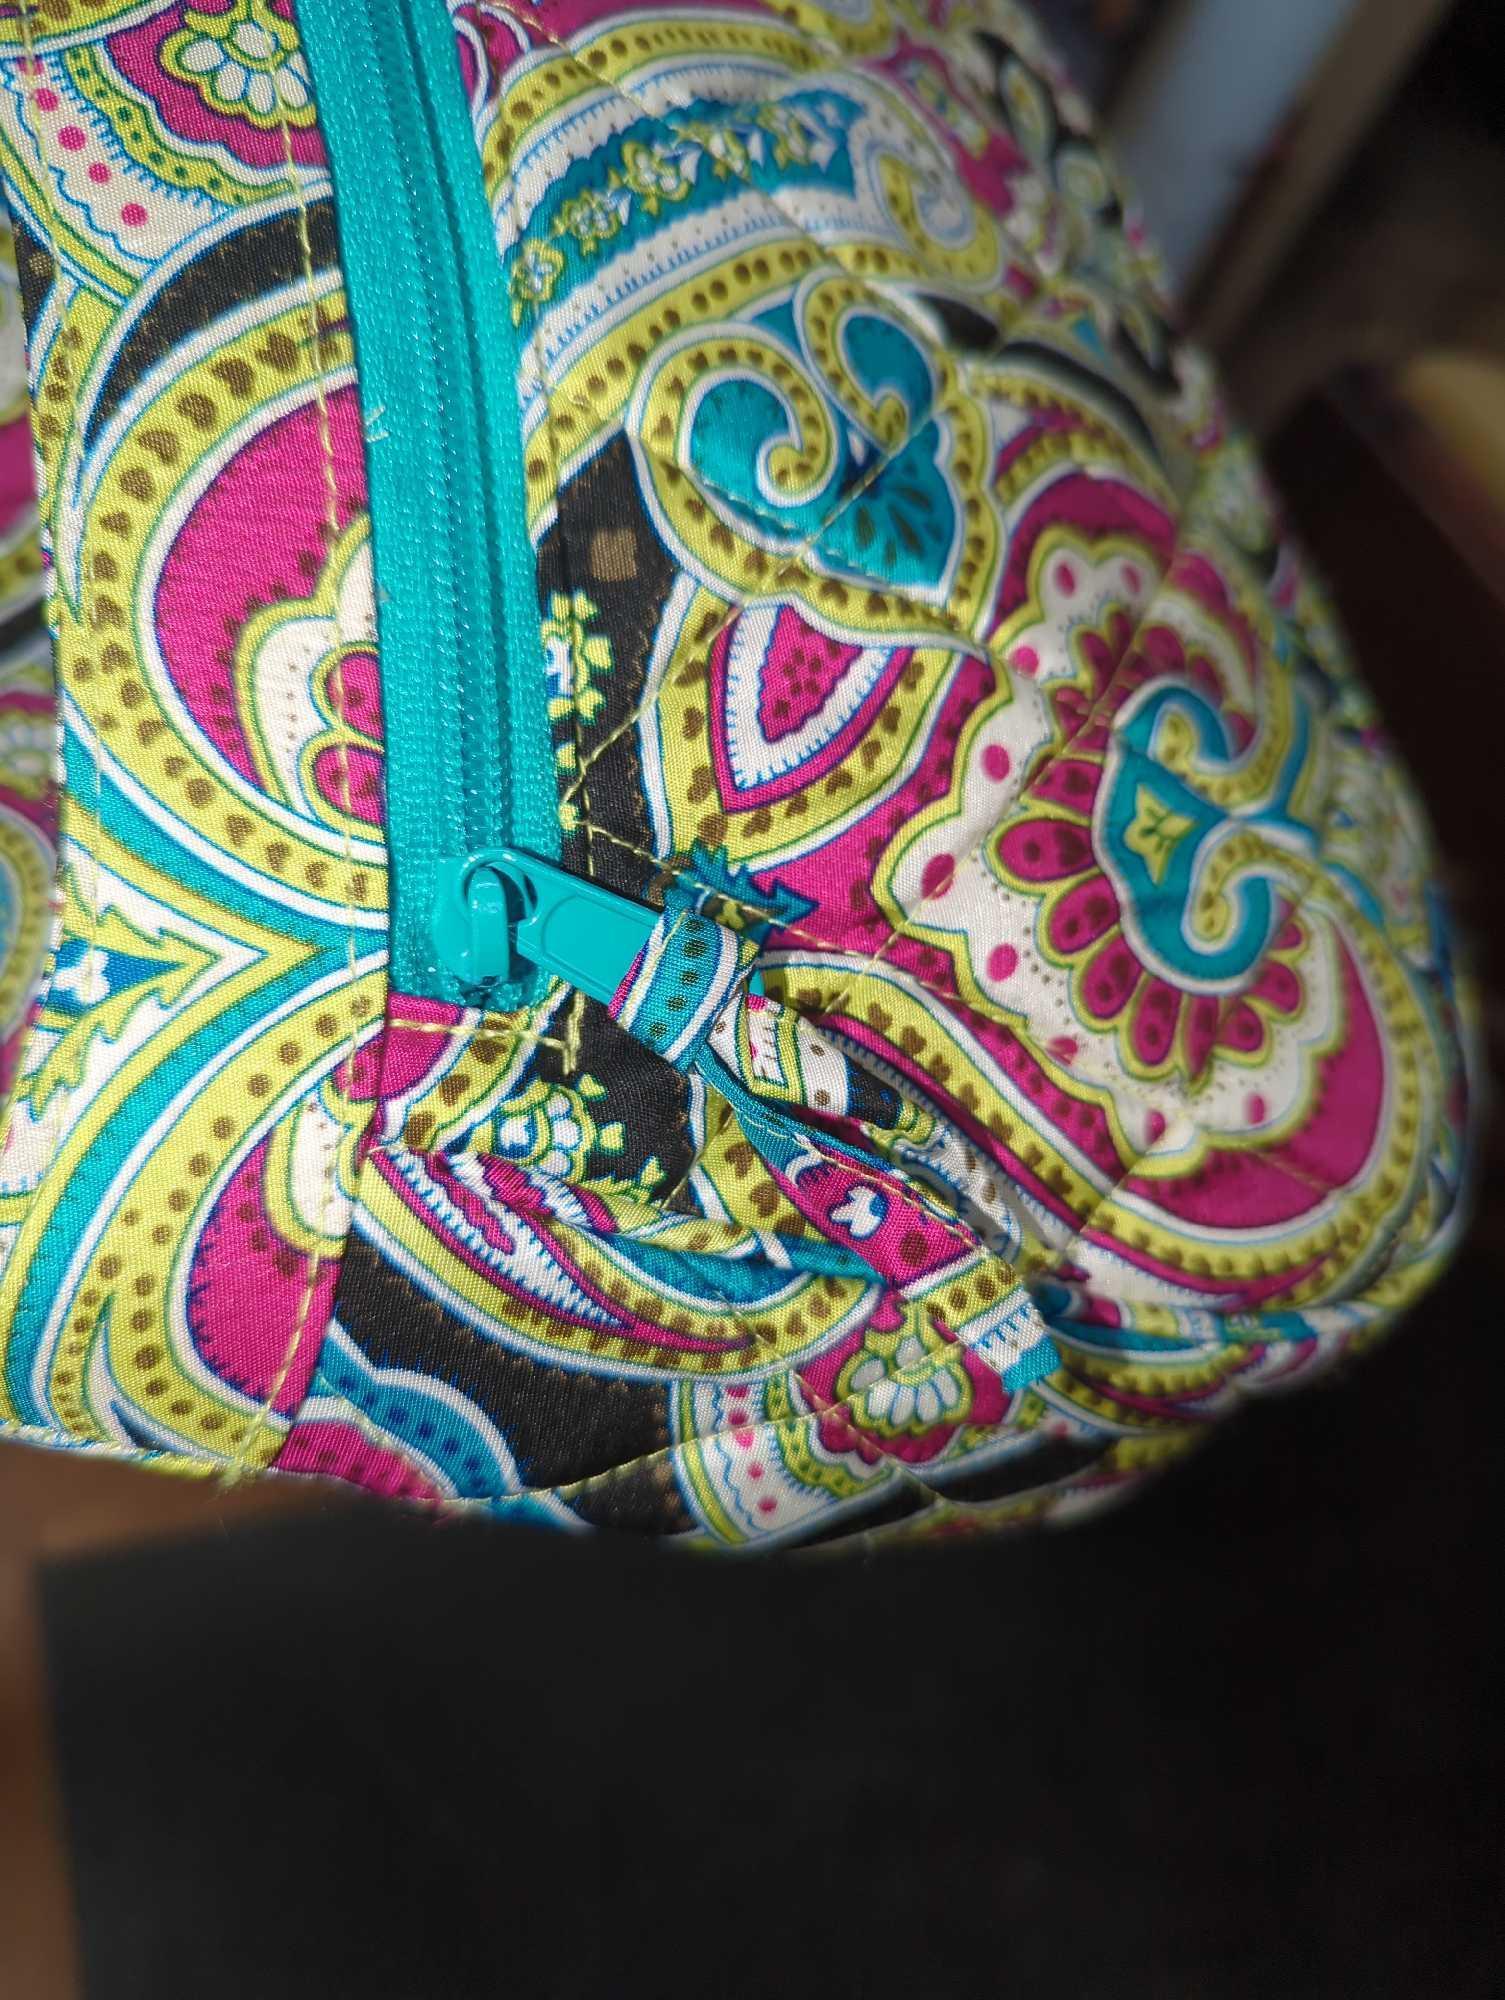 Vera Bradley Zoe Silk Collection Paisley Pattern Handbag, Appears to be in Like New Condition, No